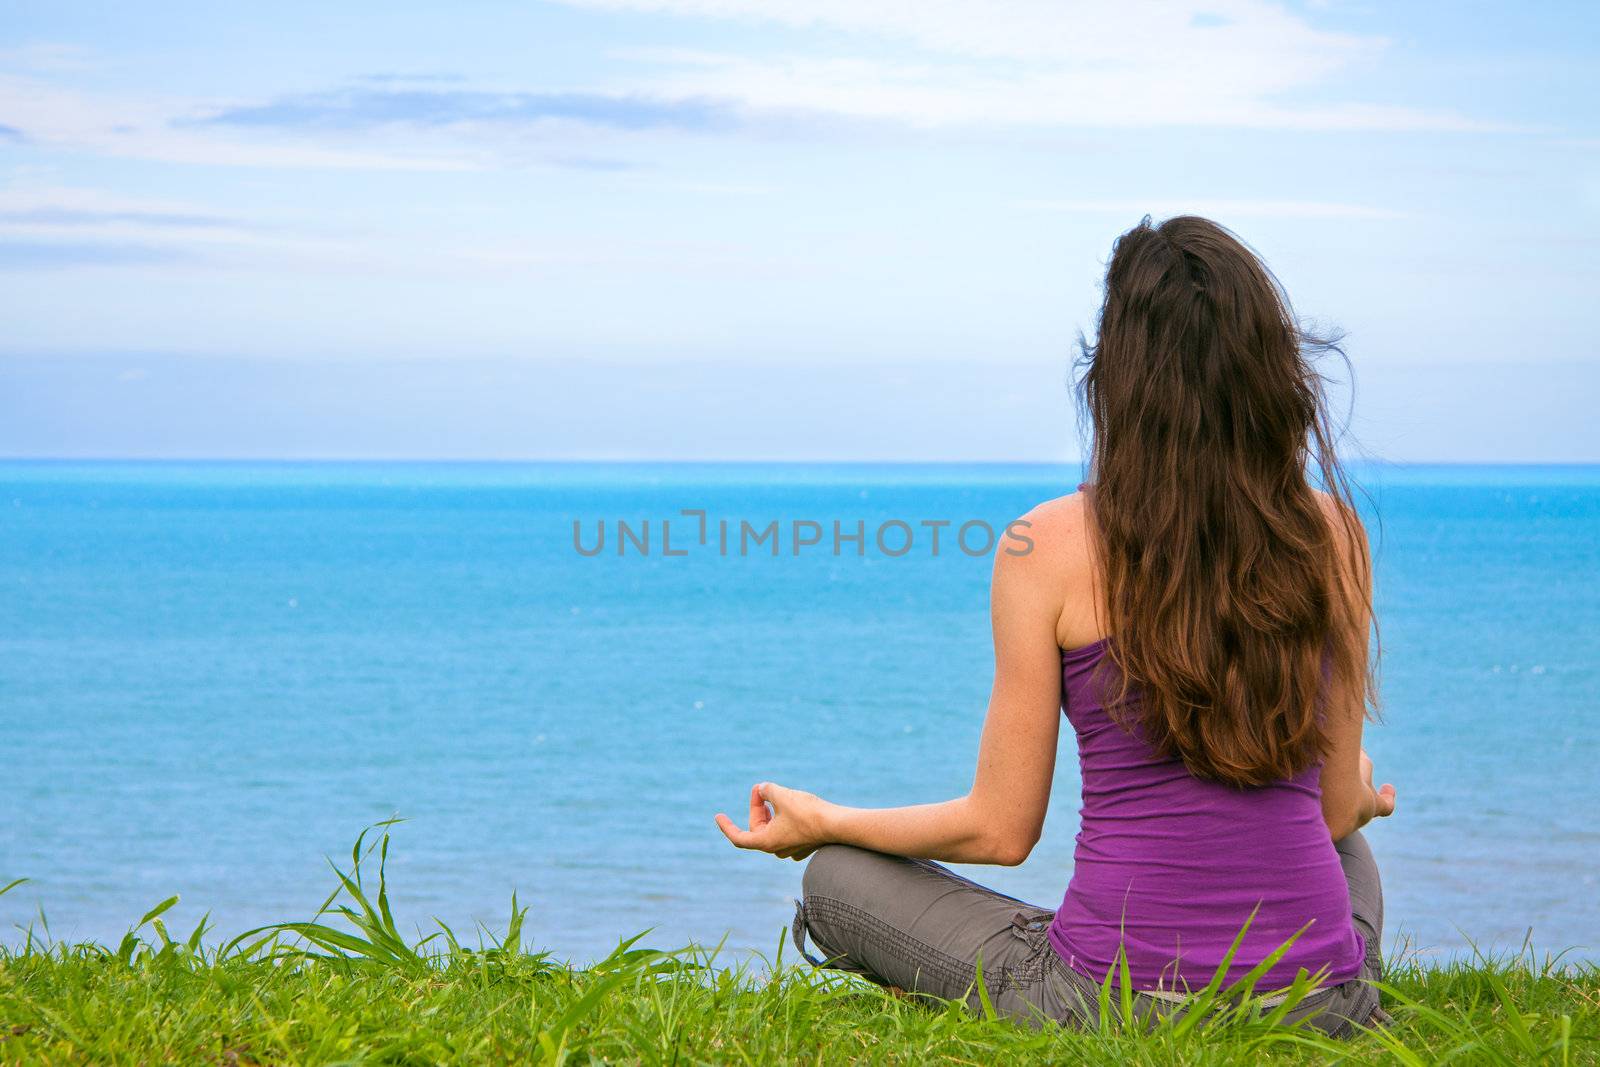 A beautiful young woman sitting meditating with a view of the ocean